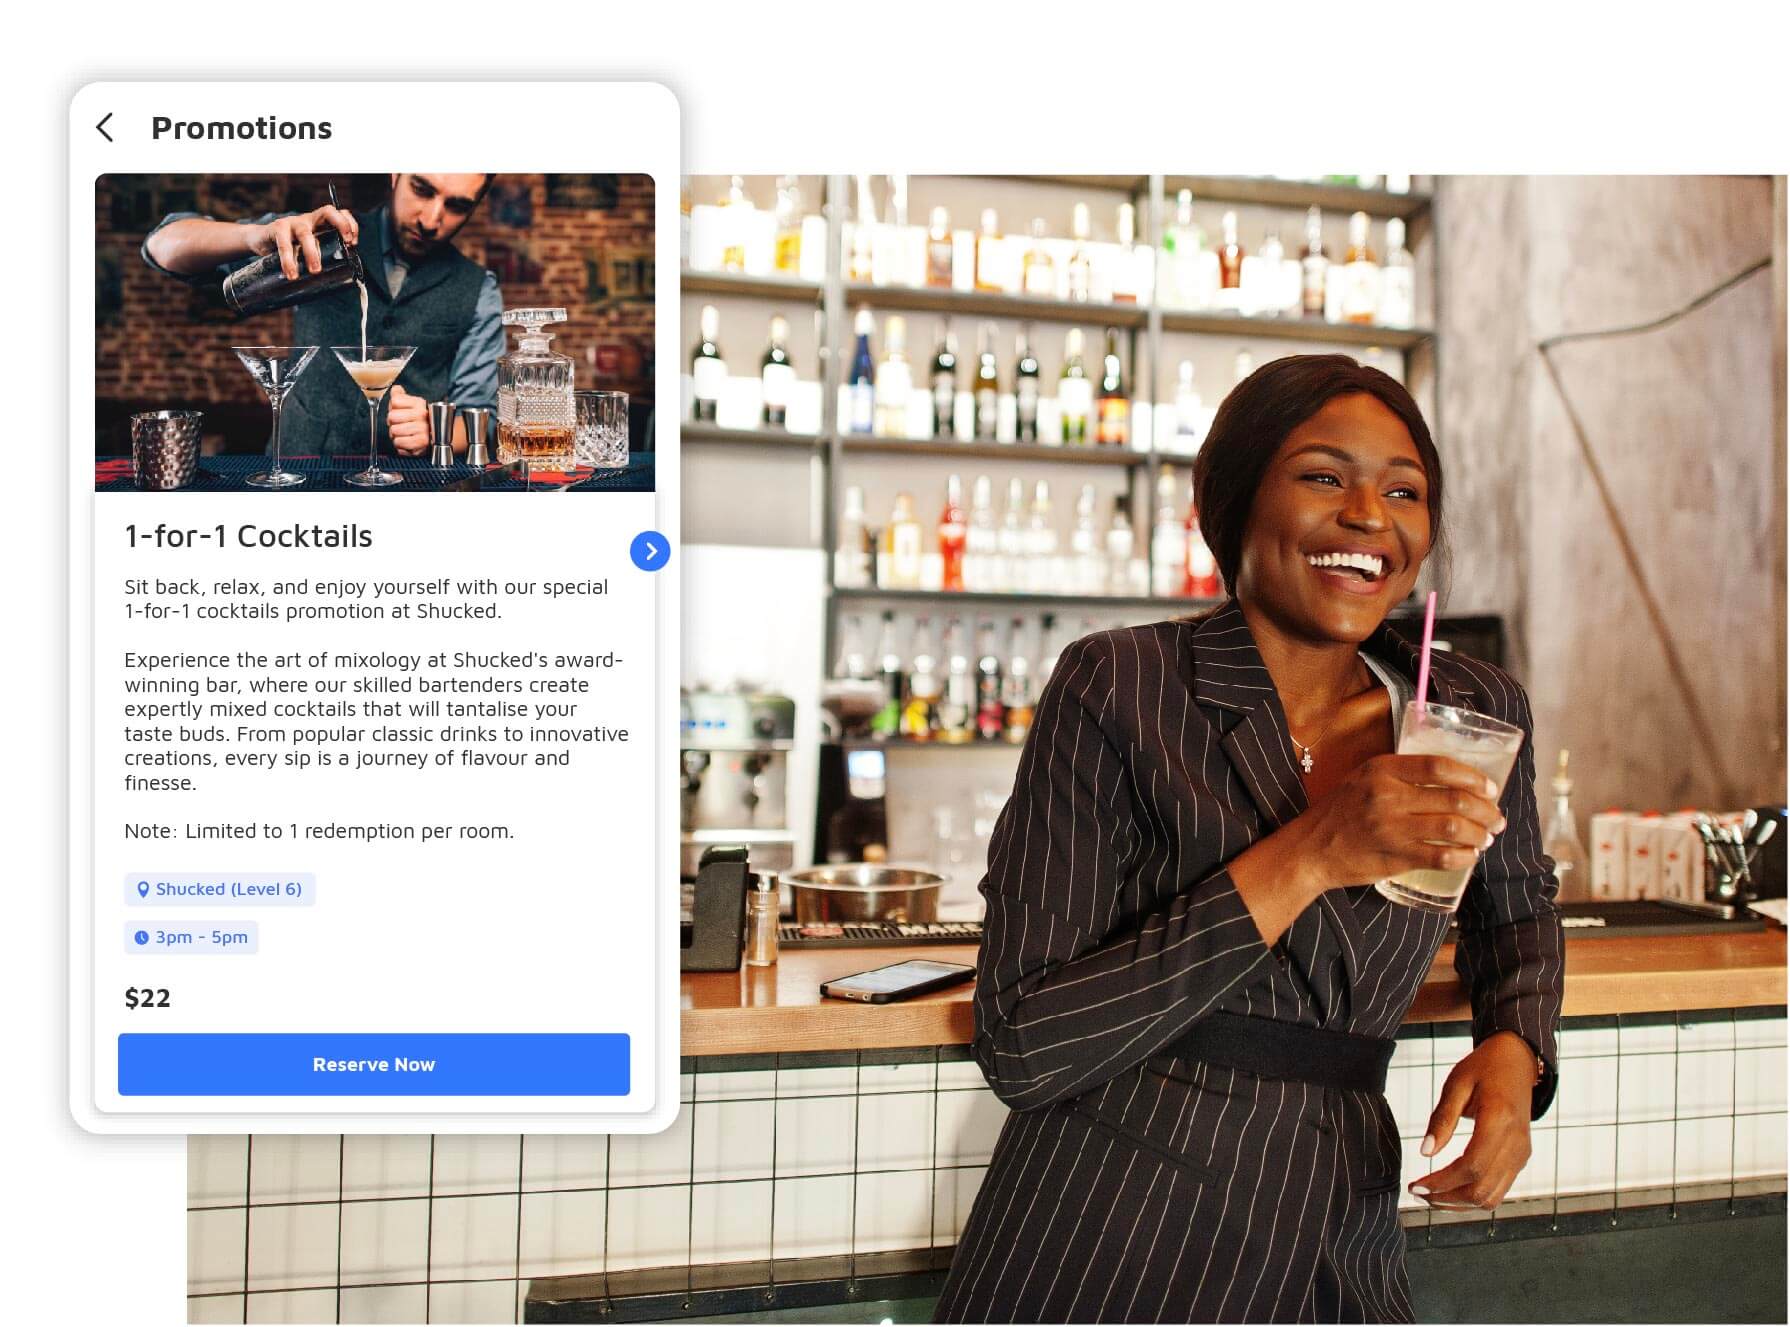 Hotel guest enjoying drink at a bar with promotions from hotel platform